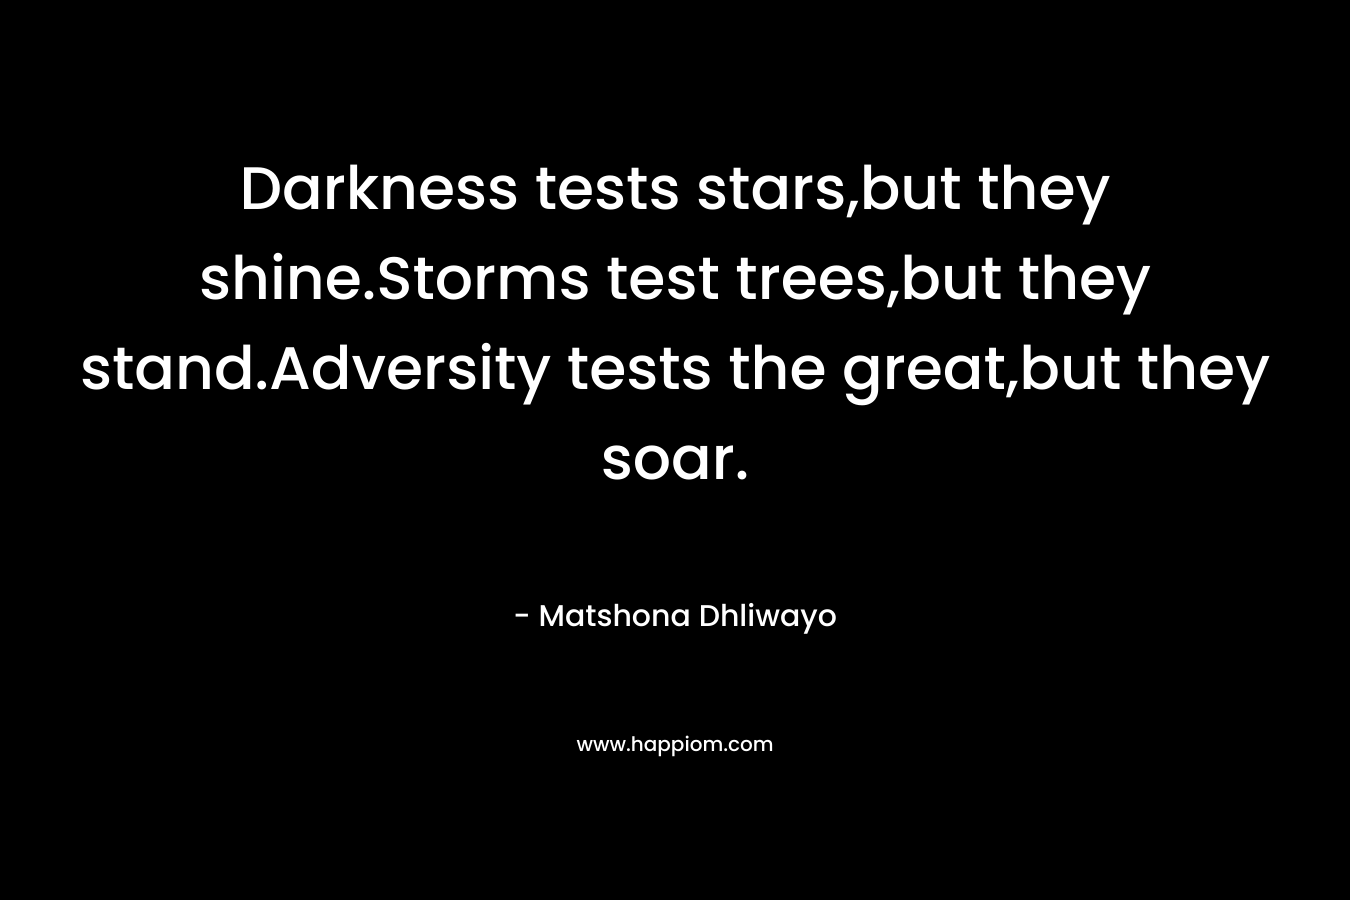 Darkness tests stars,but they shine.Storms test trees,but they stand.Adversity tests the great,but they soar.